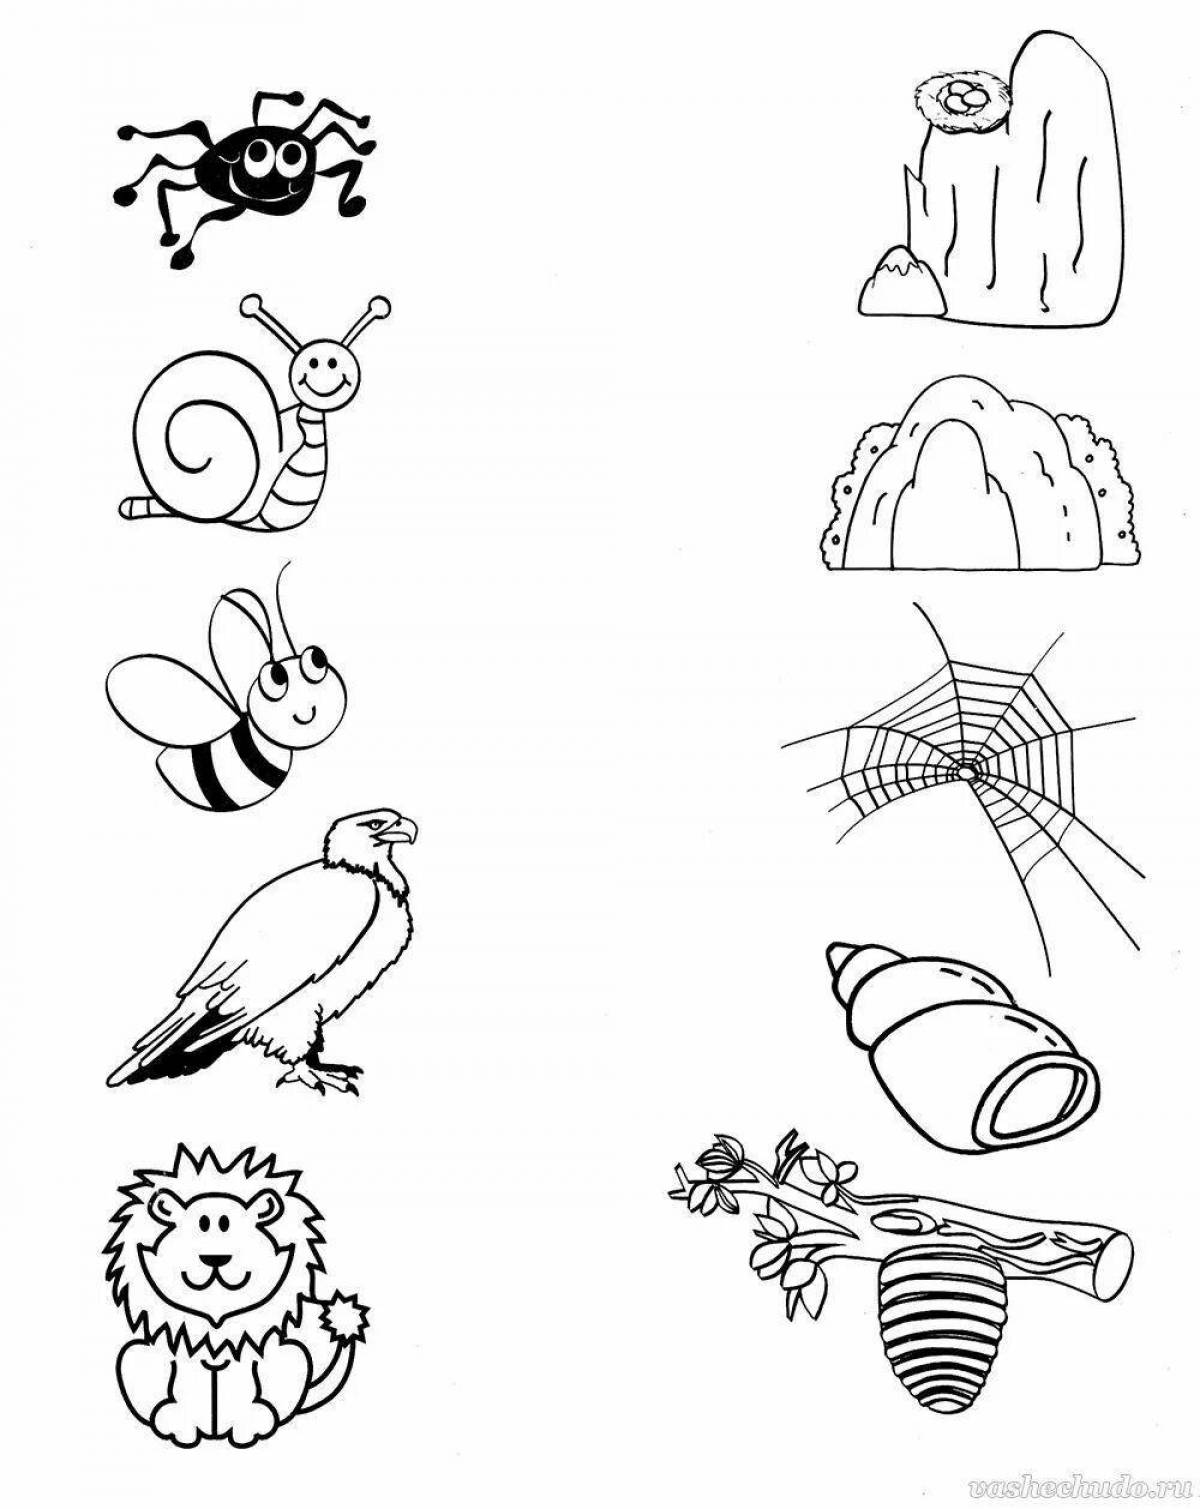 Inviting inanimate nature coloring for preschoolers